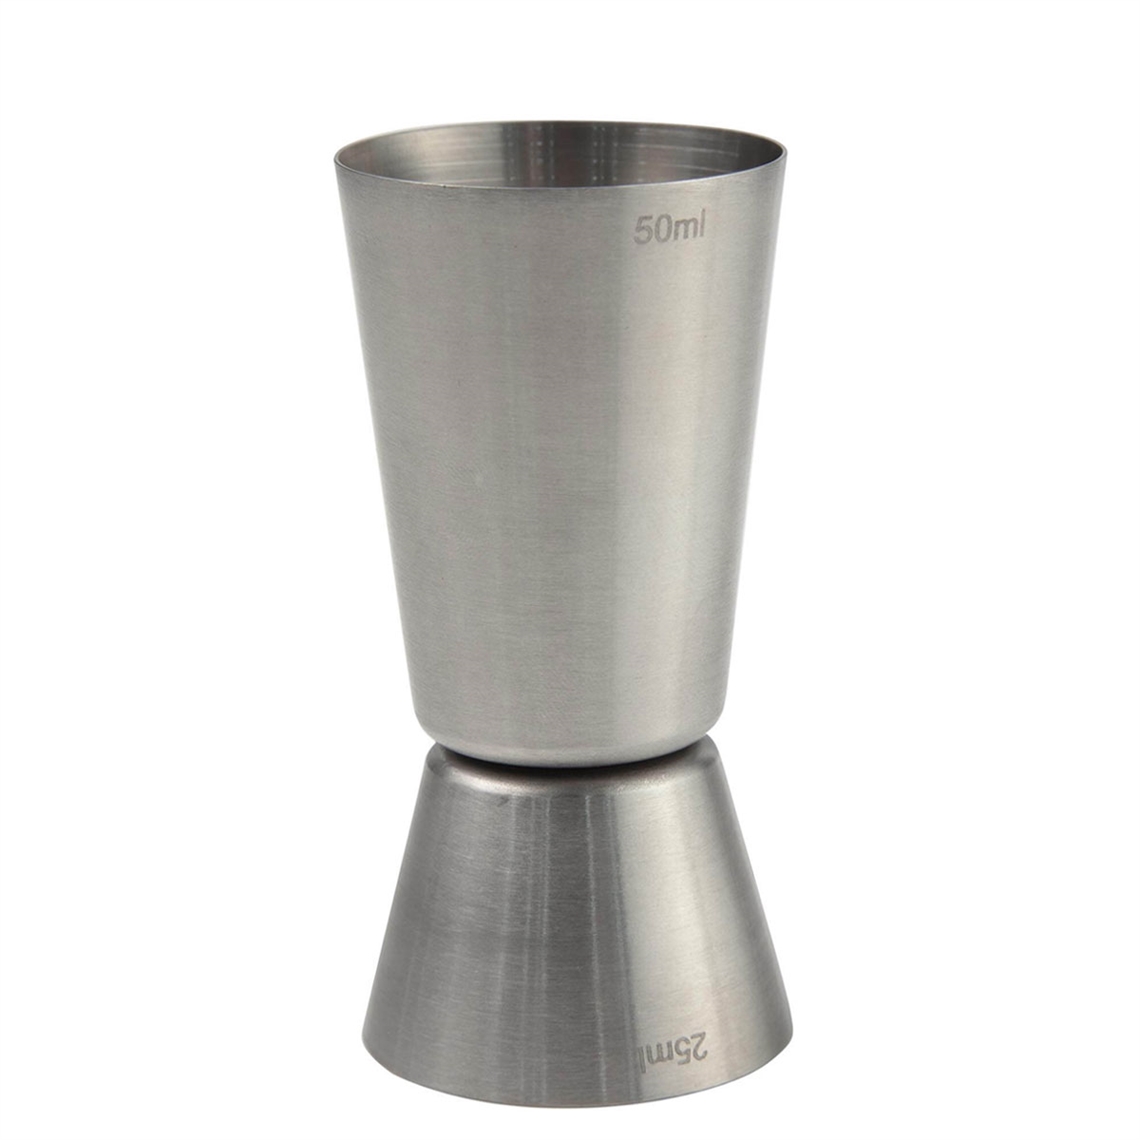 View more bar accessories from our Spirit and Wine Bar Thimble Measures range